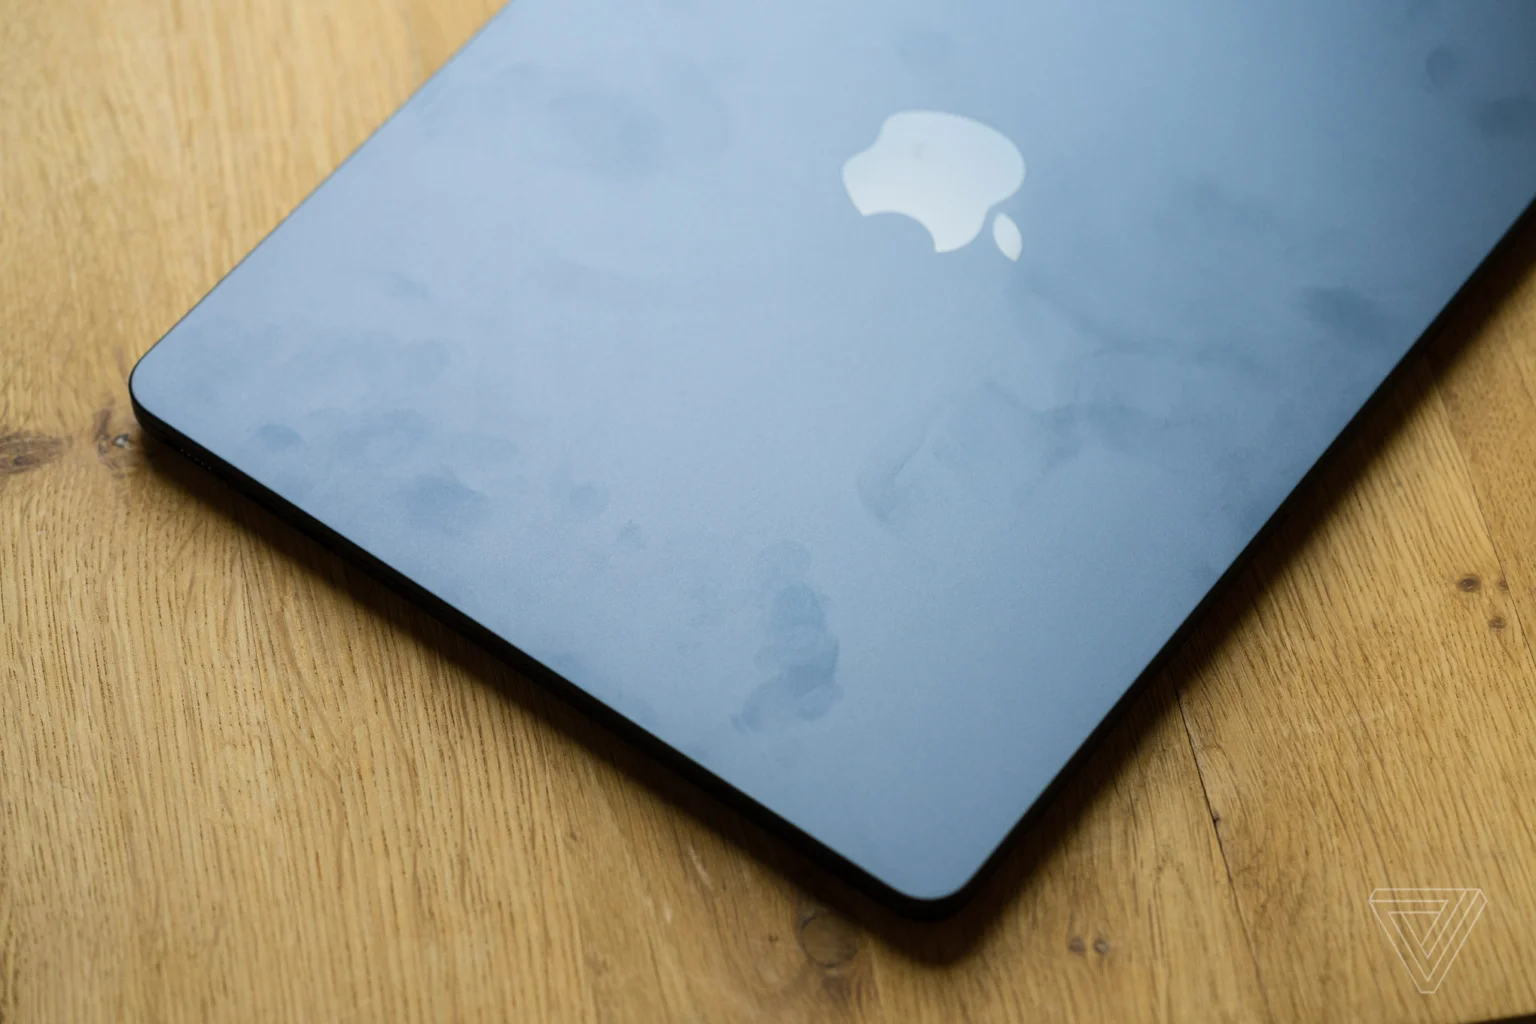 The new MacBook will be more friendly to users